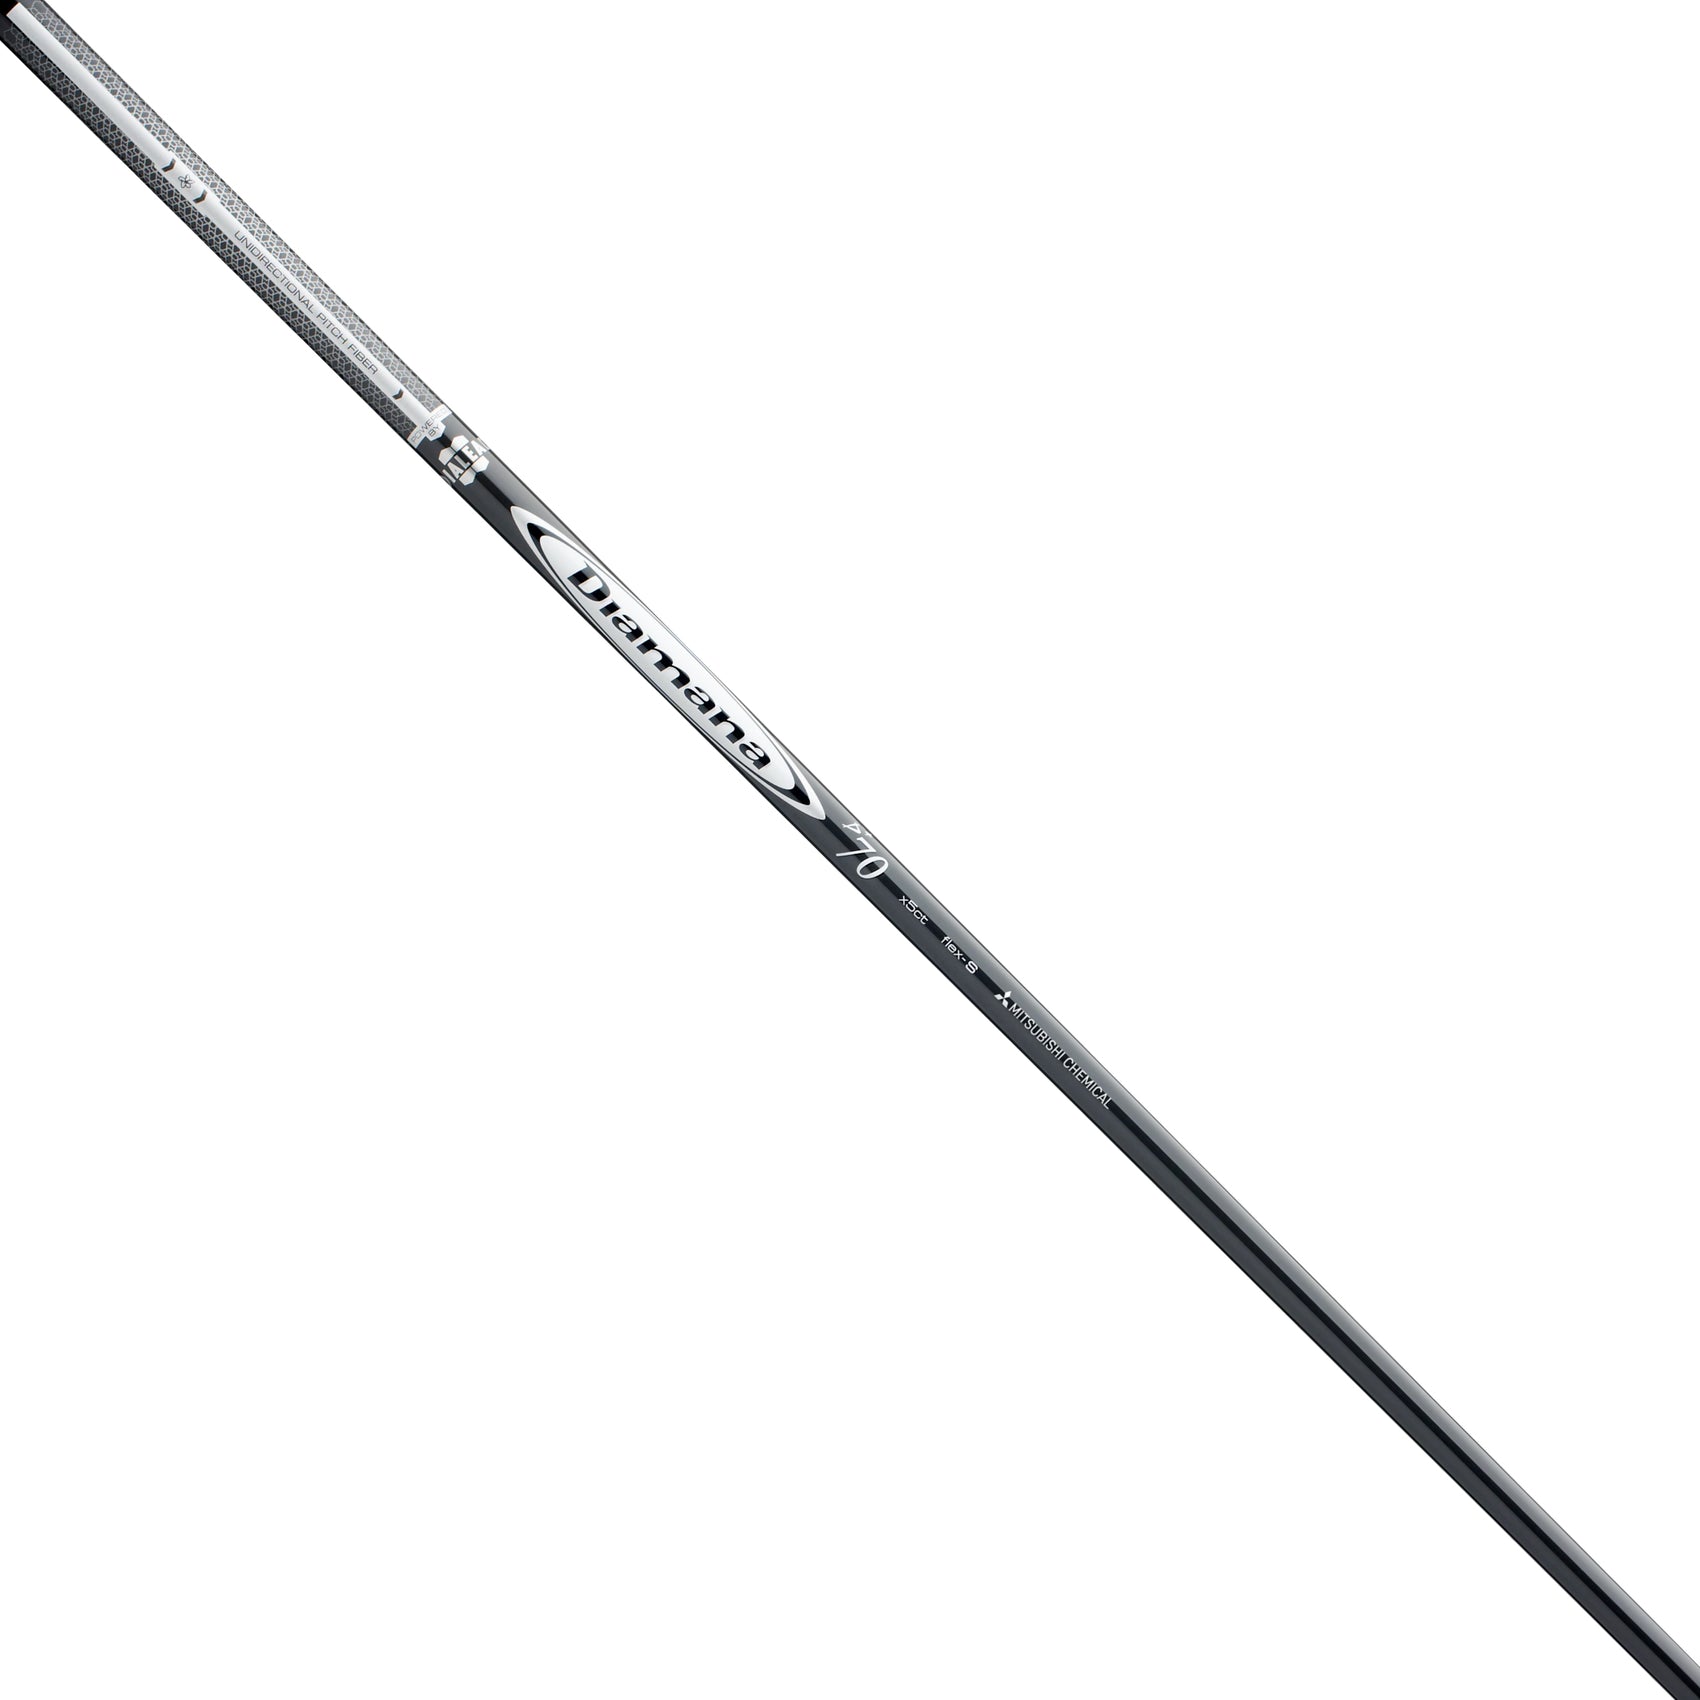 Assembled) Mitsubishi Diamana D+Plus Limited Graphite Shaft with